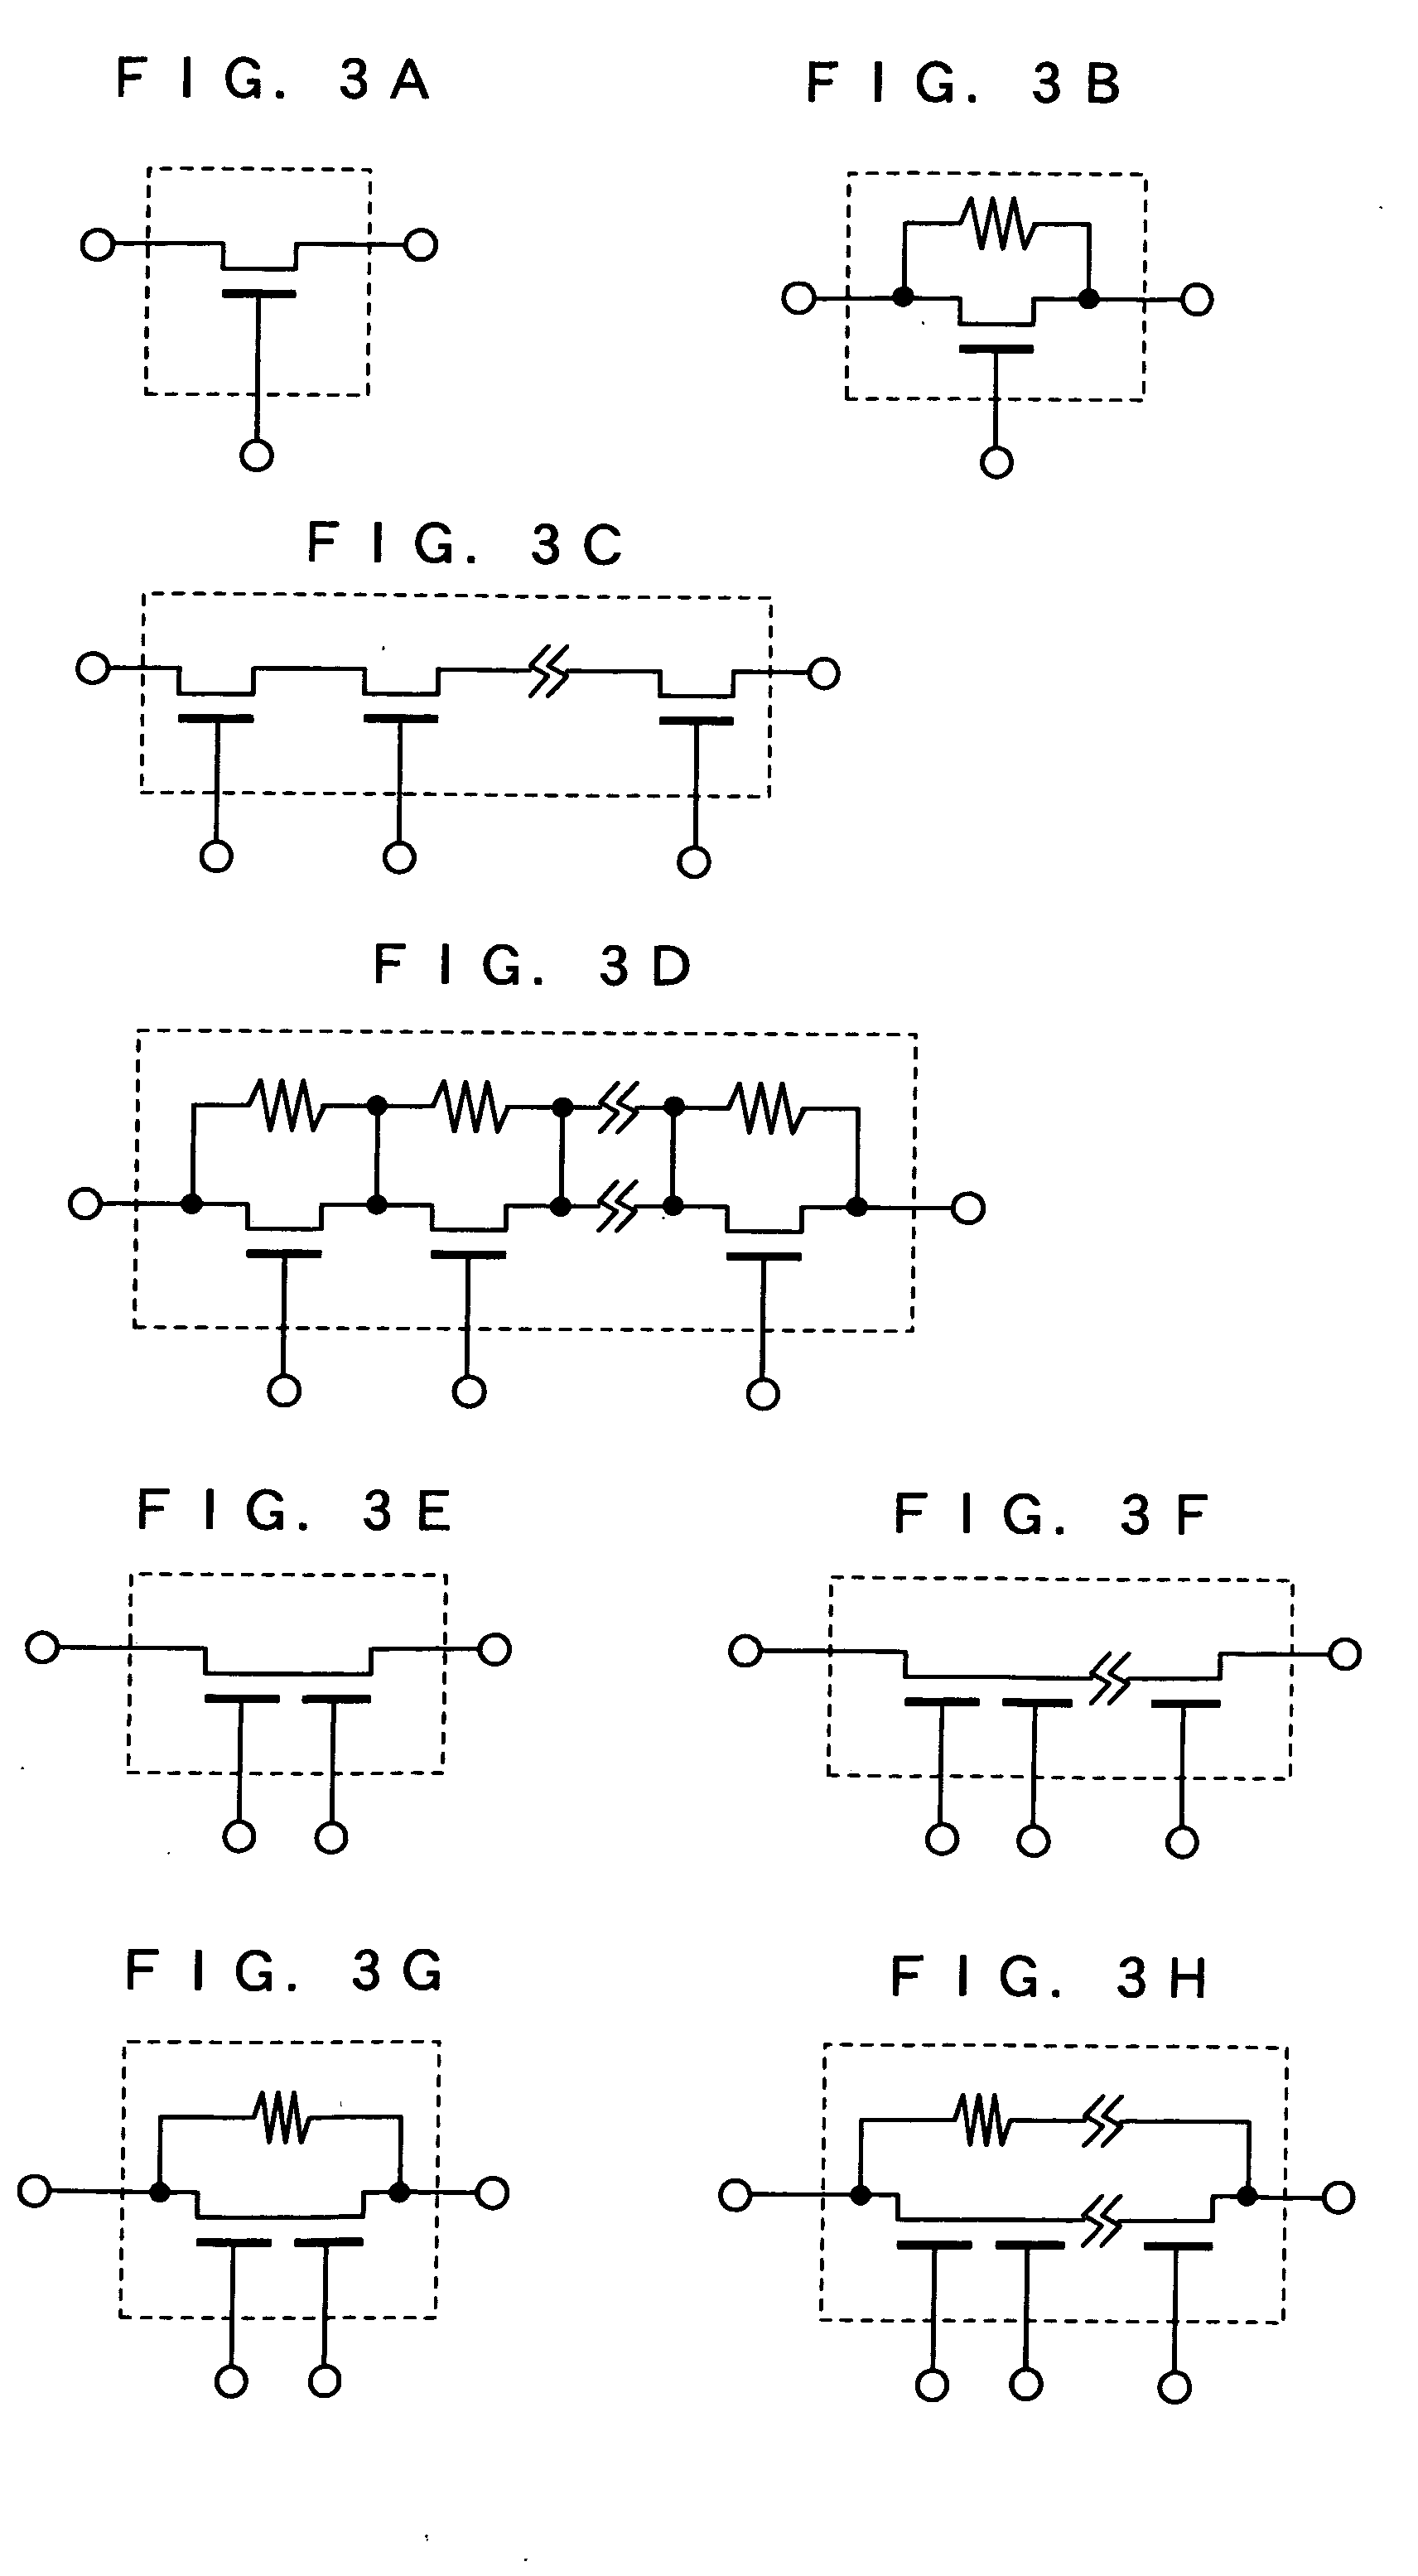 Radio frequency switching circuit